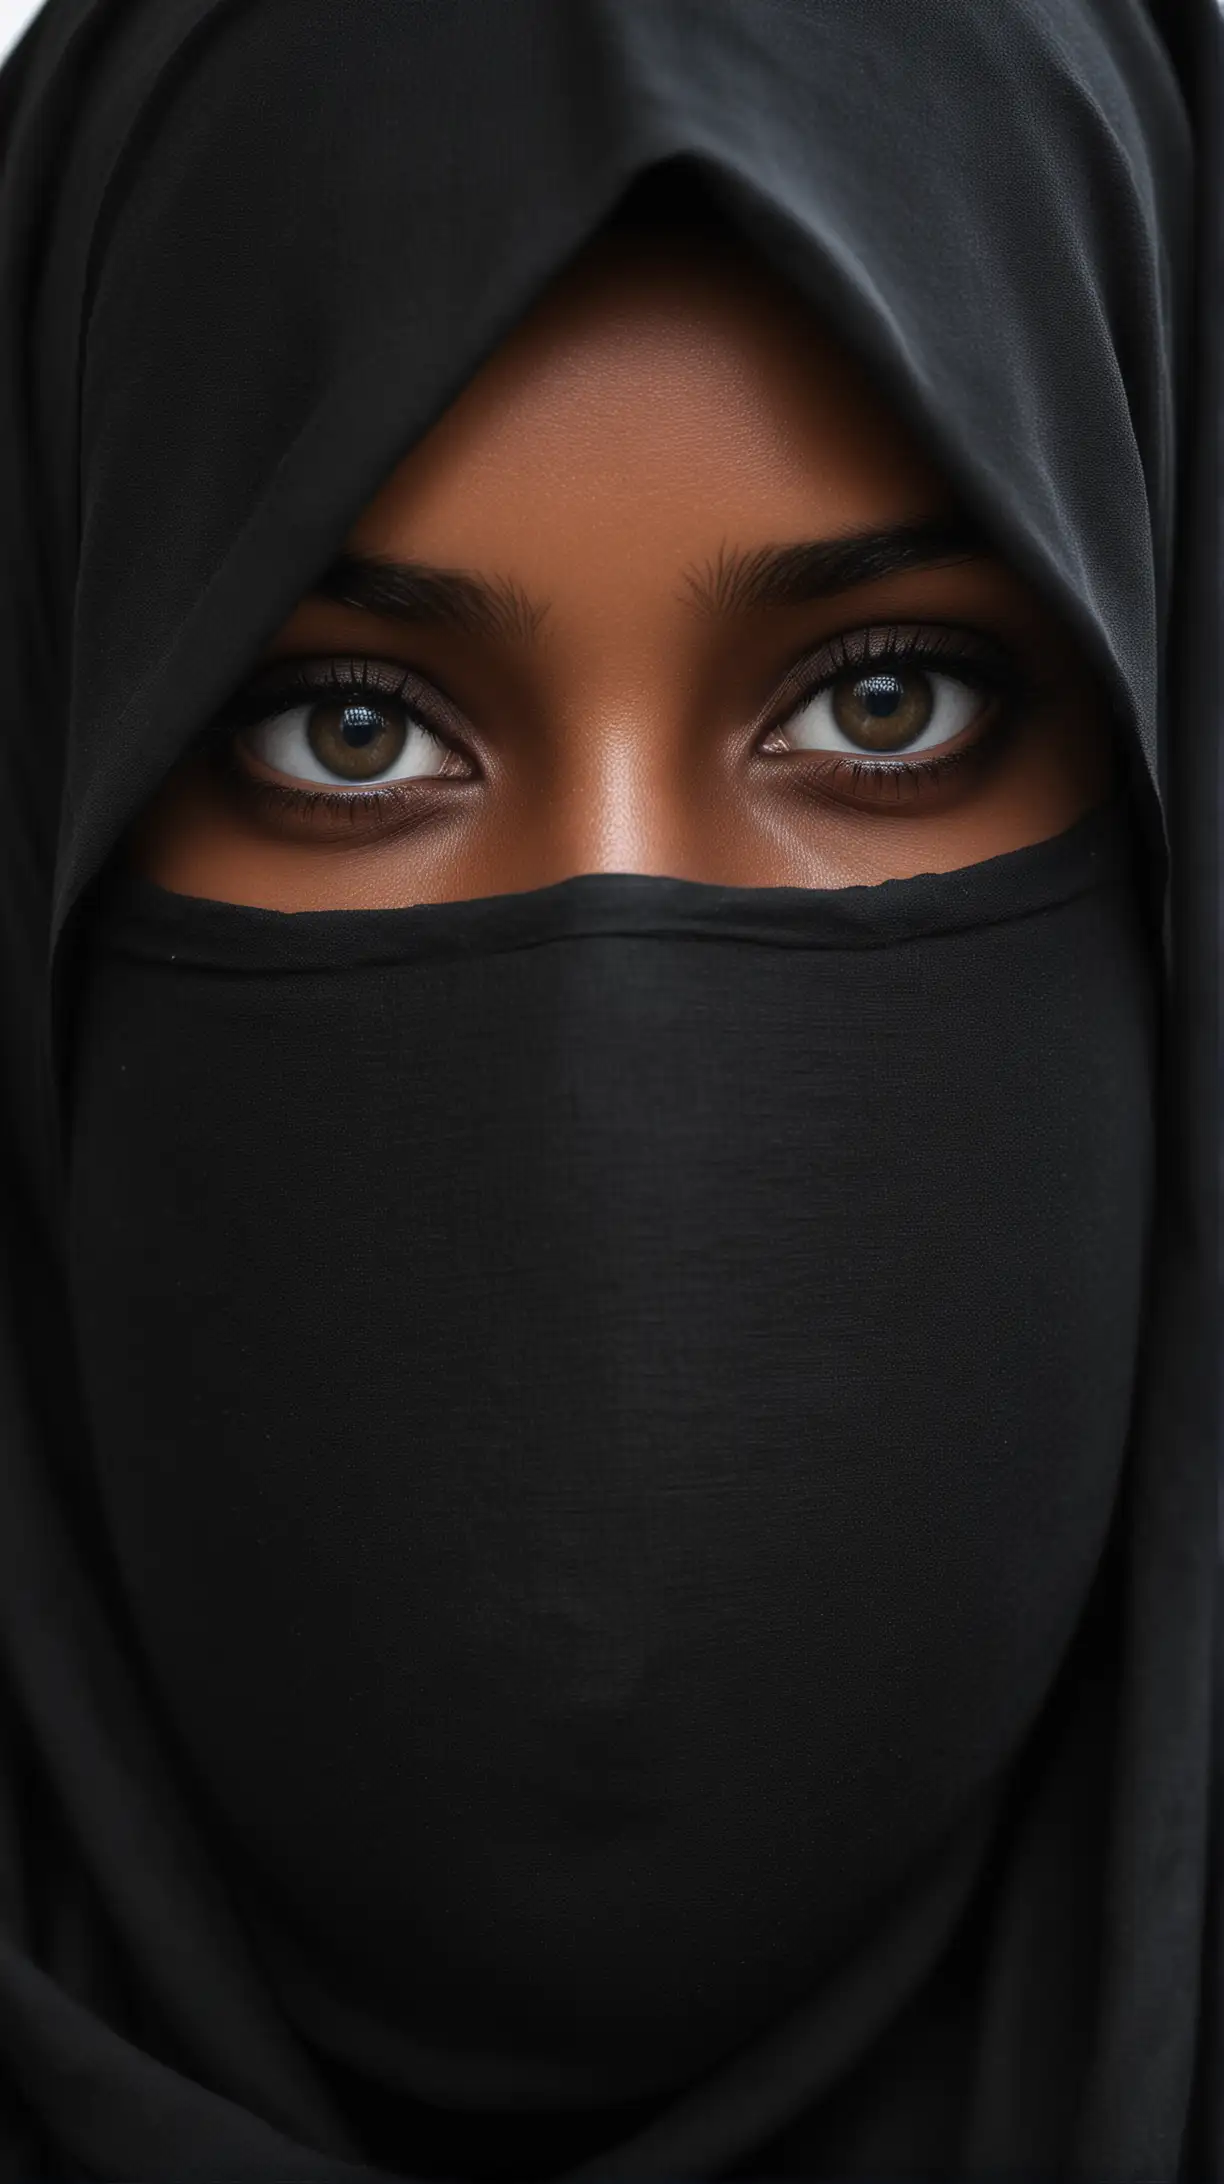 Somali Girl Portrait with Niqab and Beautiful Eyes